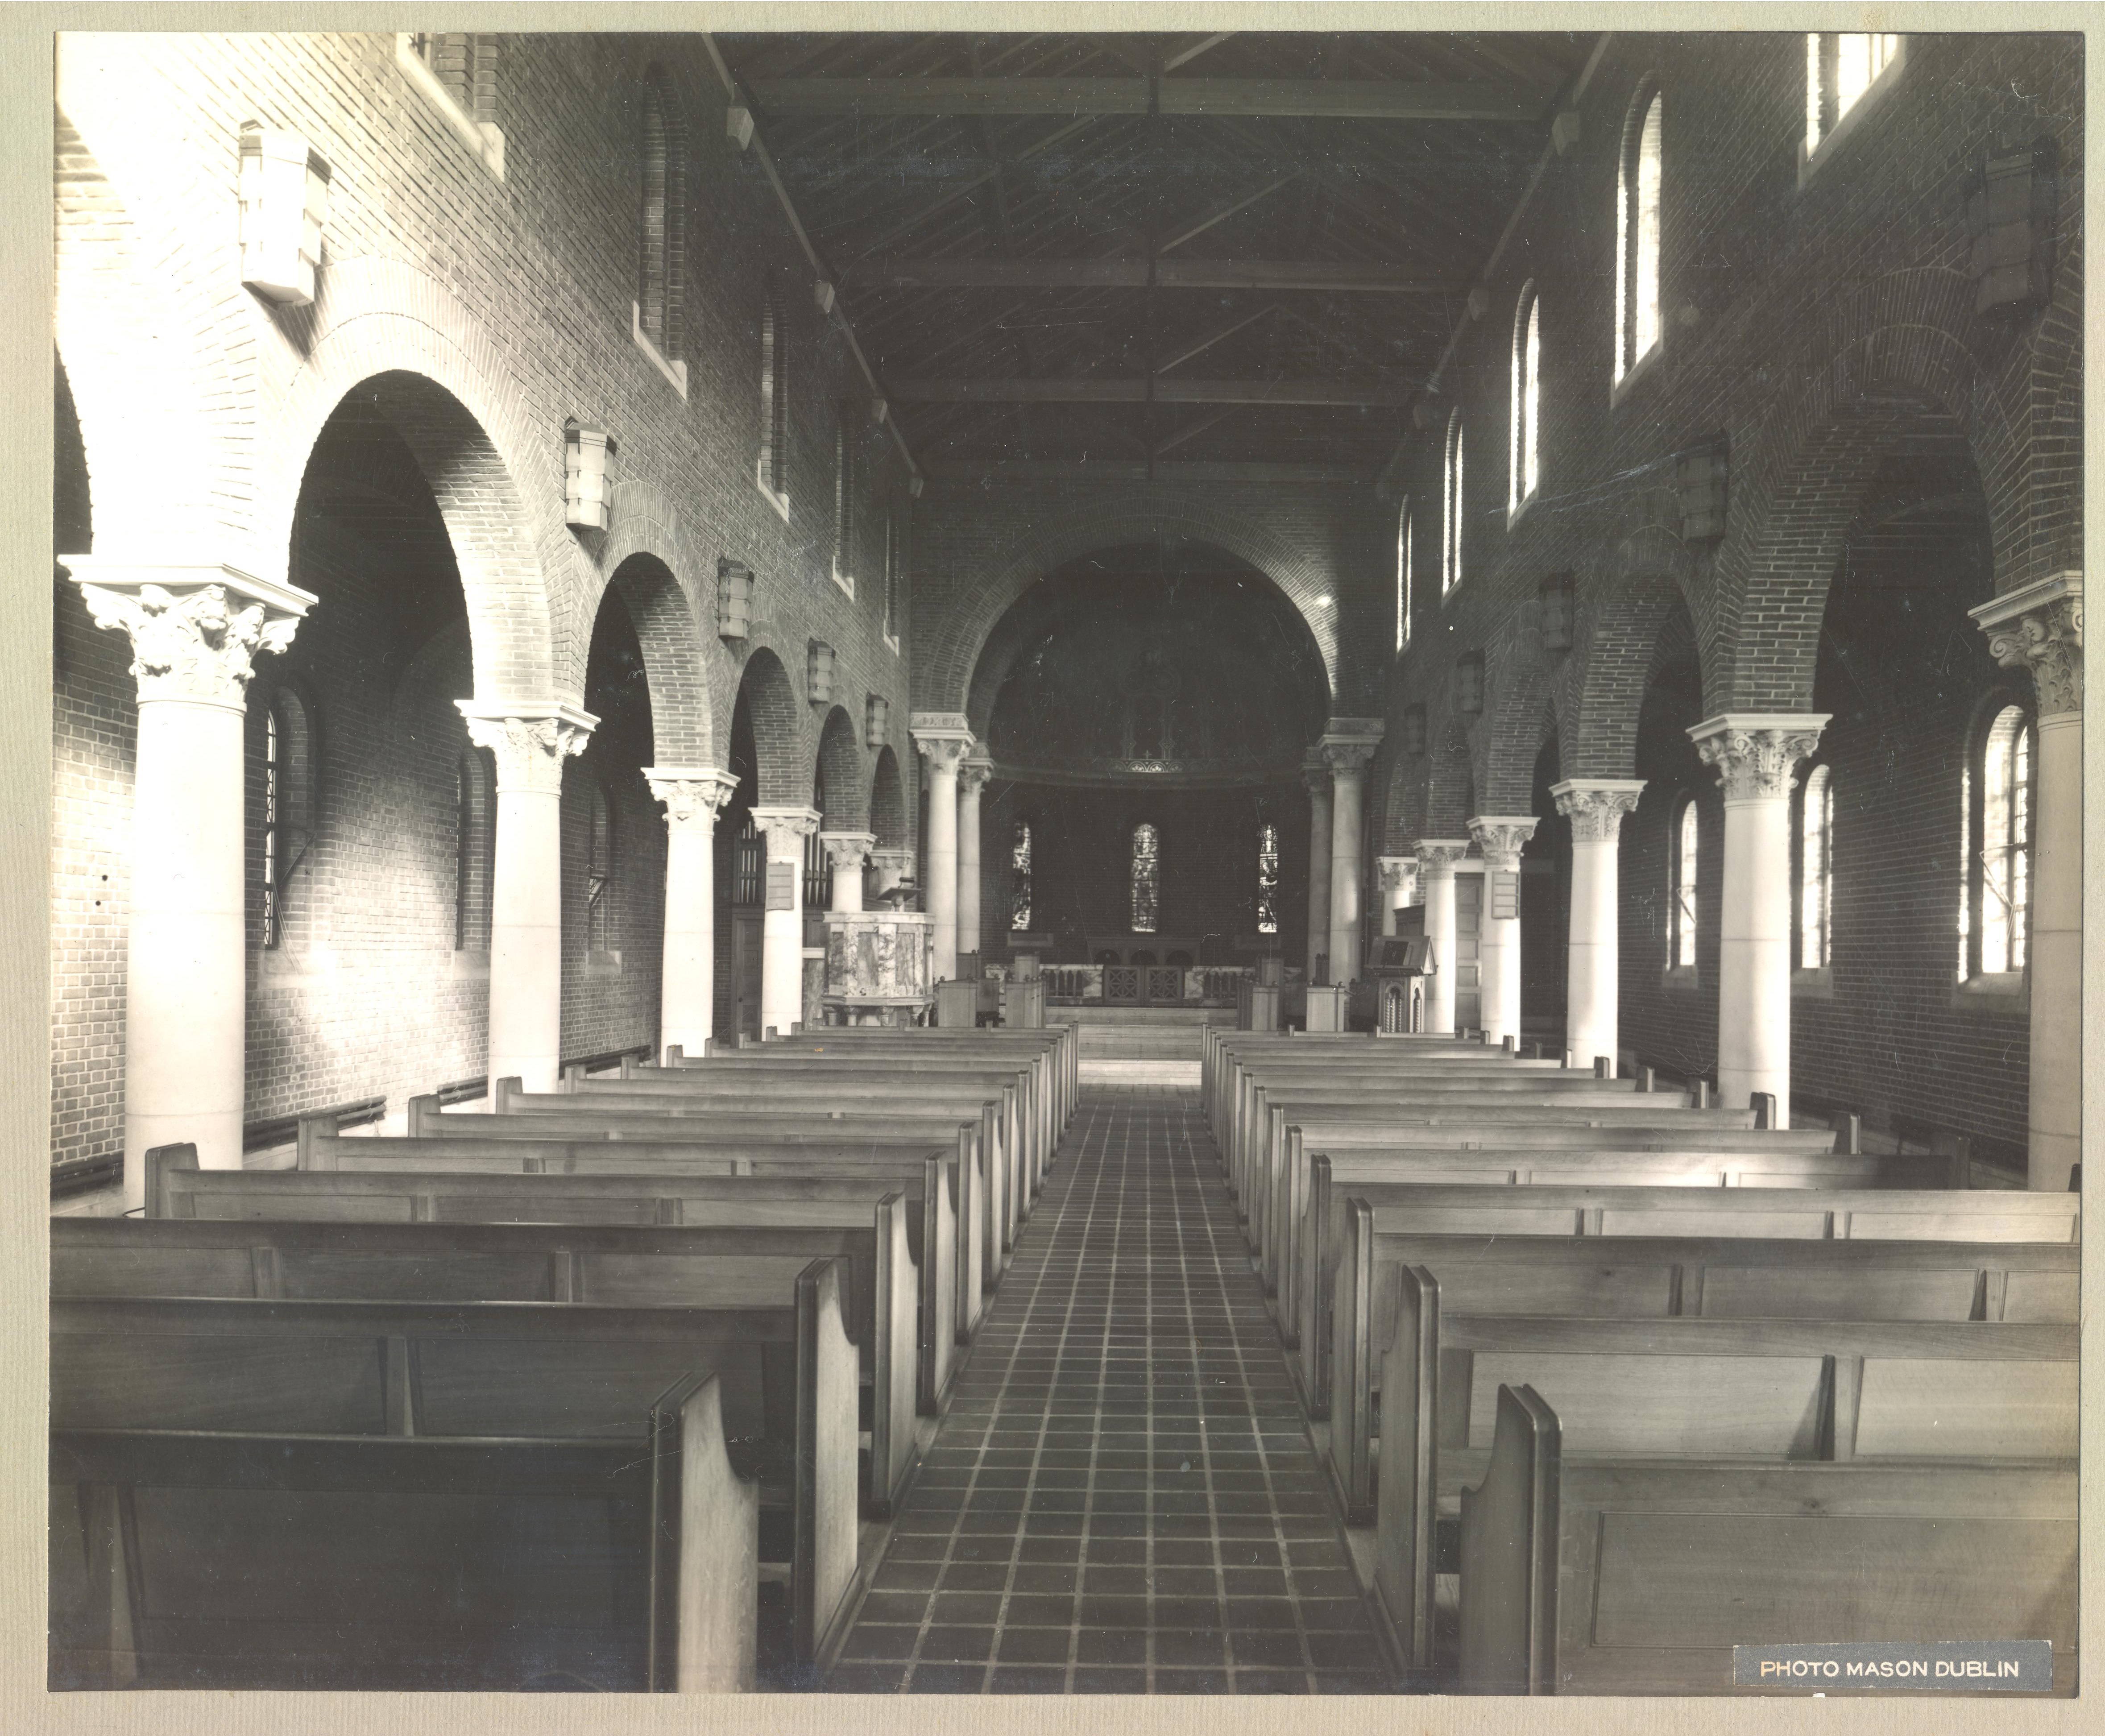 An undated image of the interior of the new church, perhaps taken at the same time as the photograph listed earlier showing the completed church. RCB Library P.80.29.3